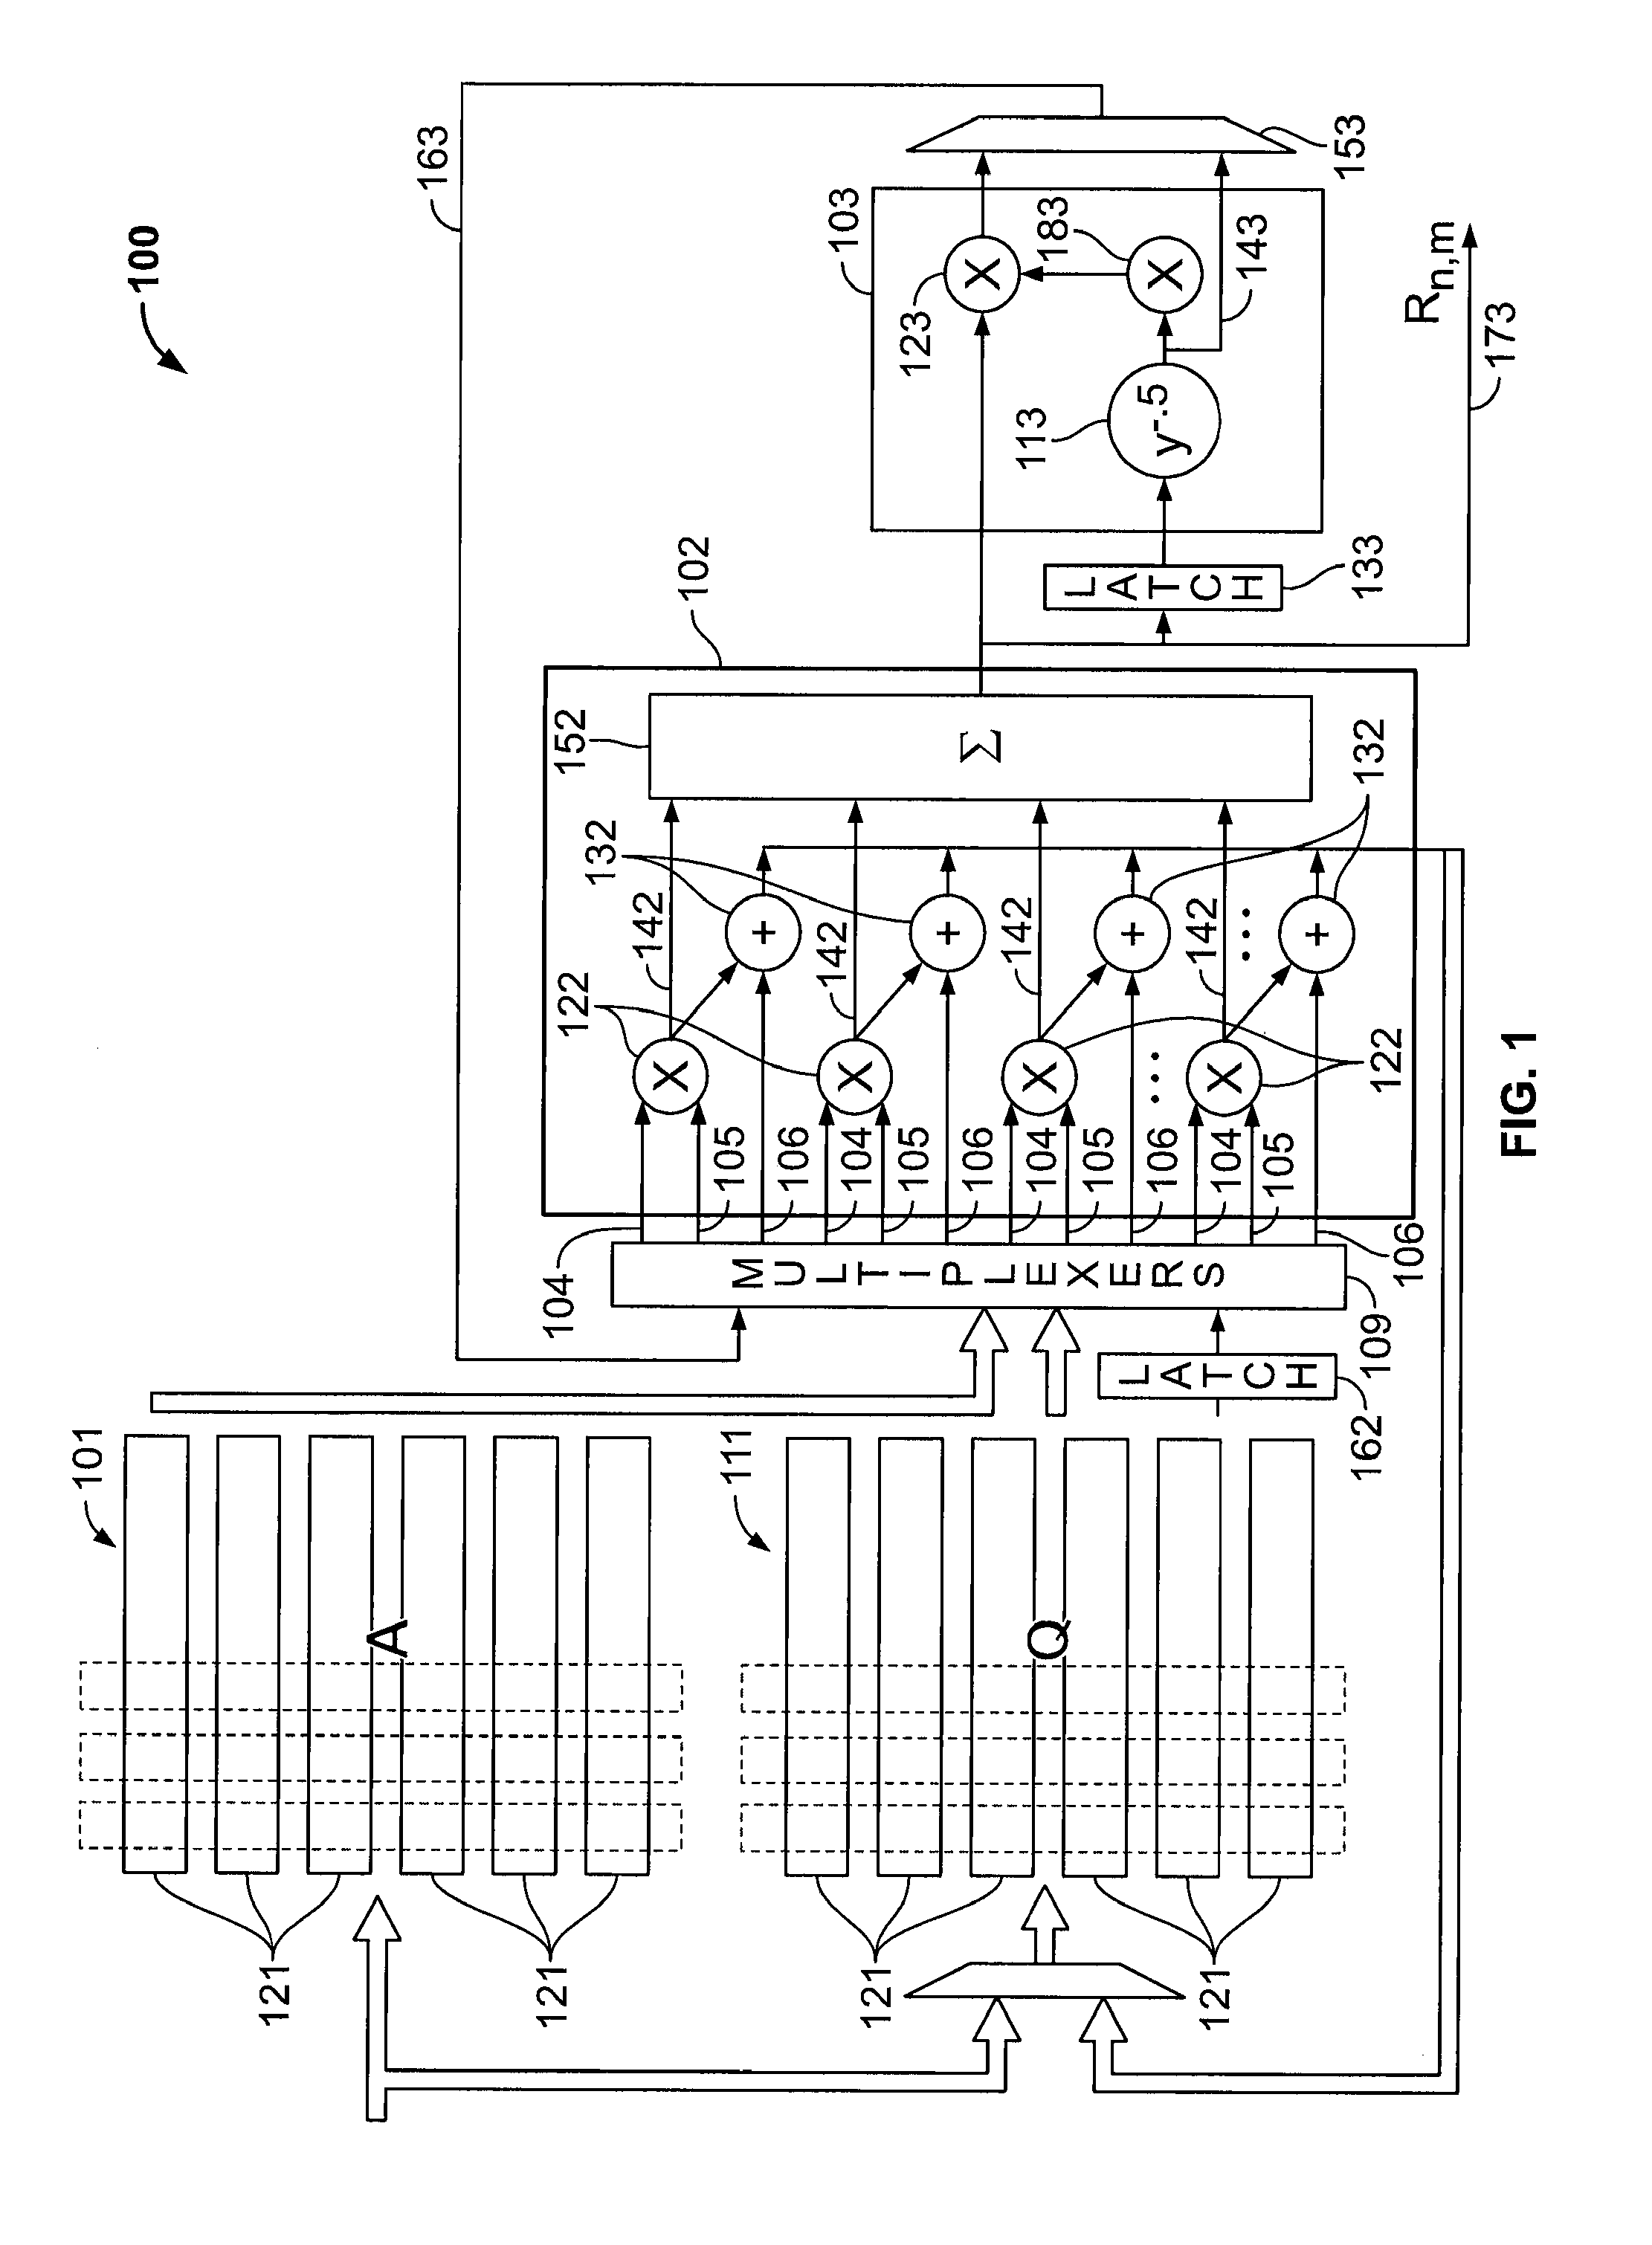 QR decomposition in an integrated circuit device